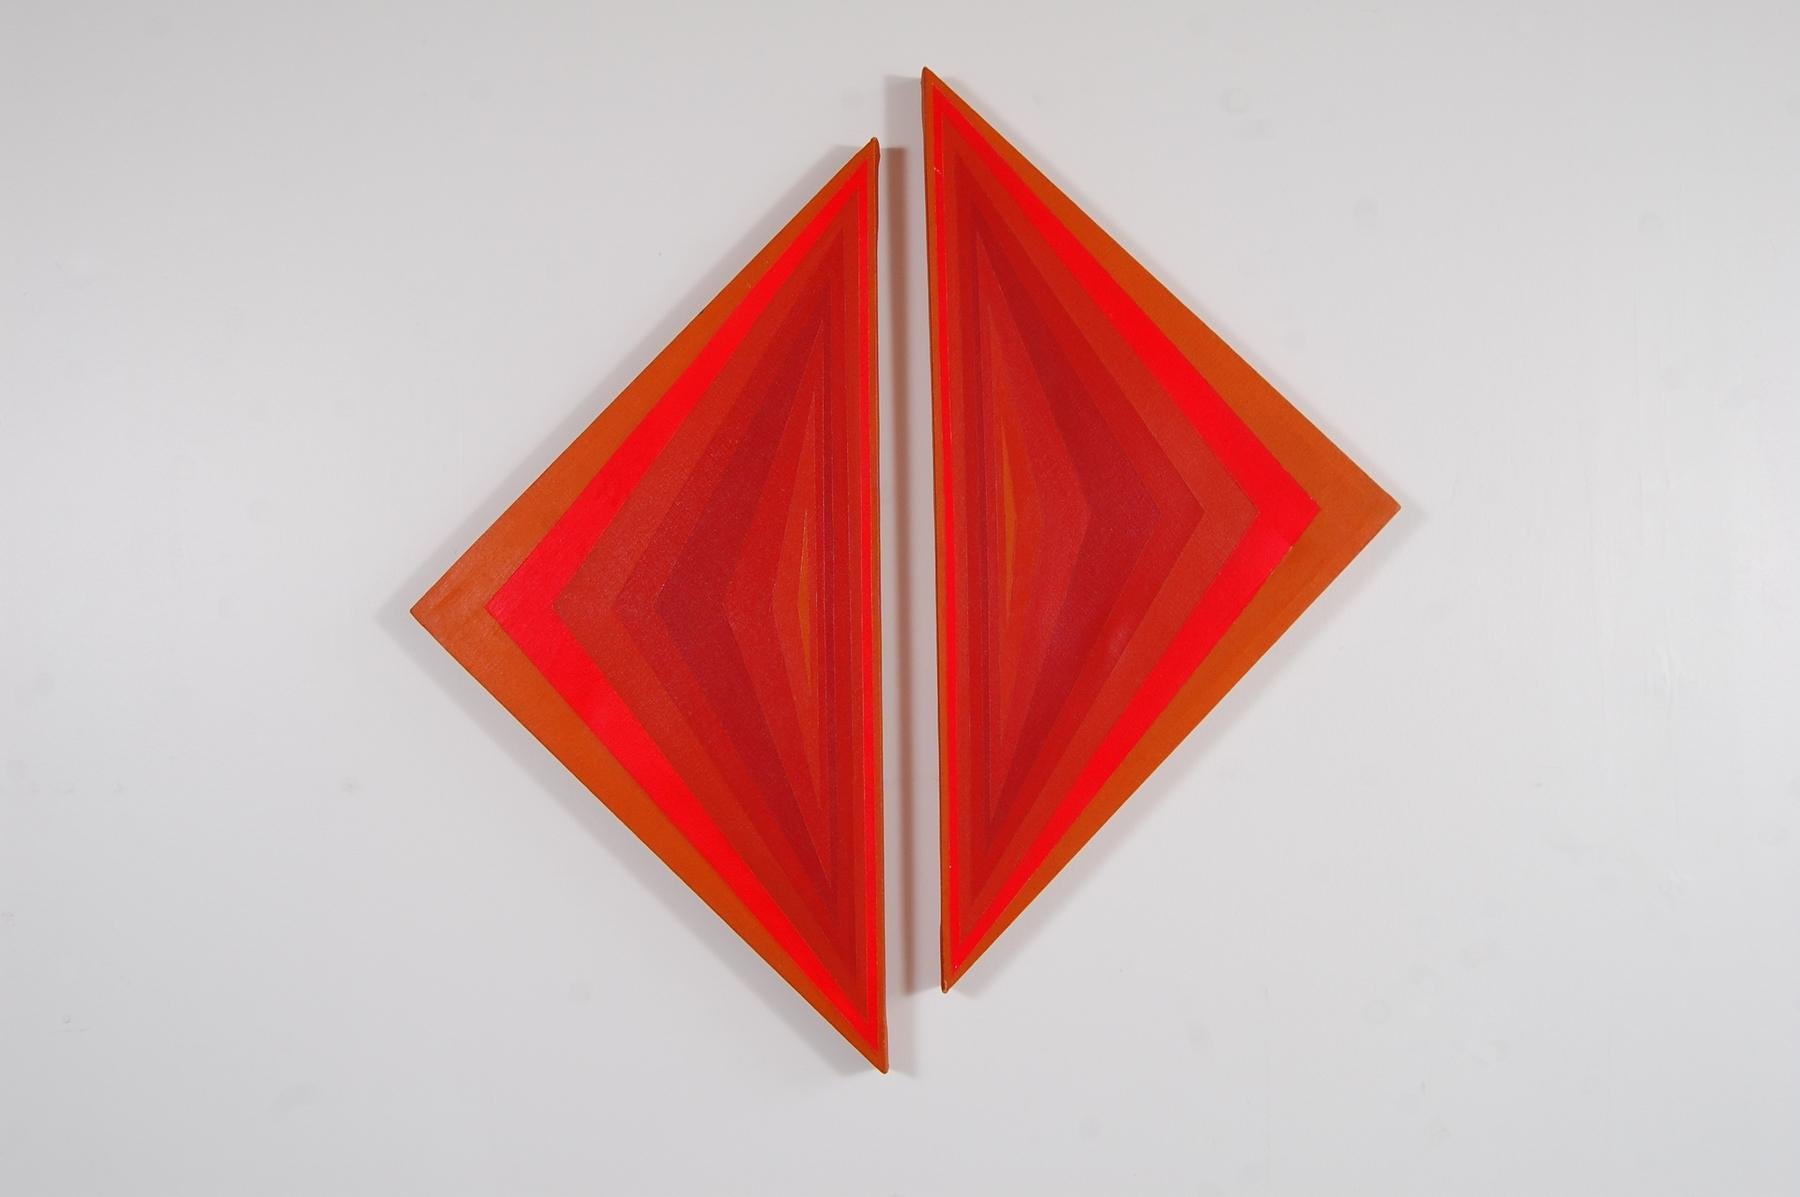 Hard-edge painting, circa 1972. Painting consists of two triangular elements. Unsigned.